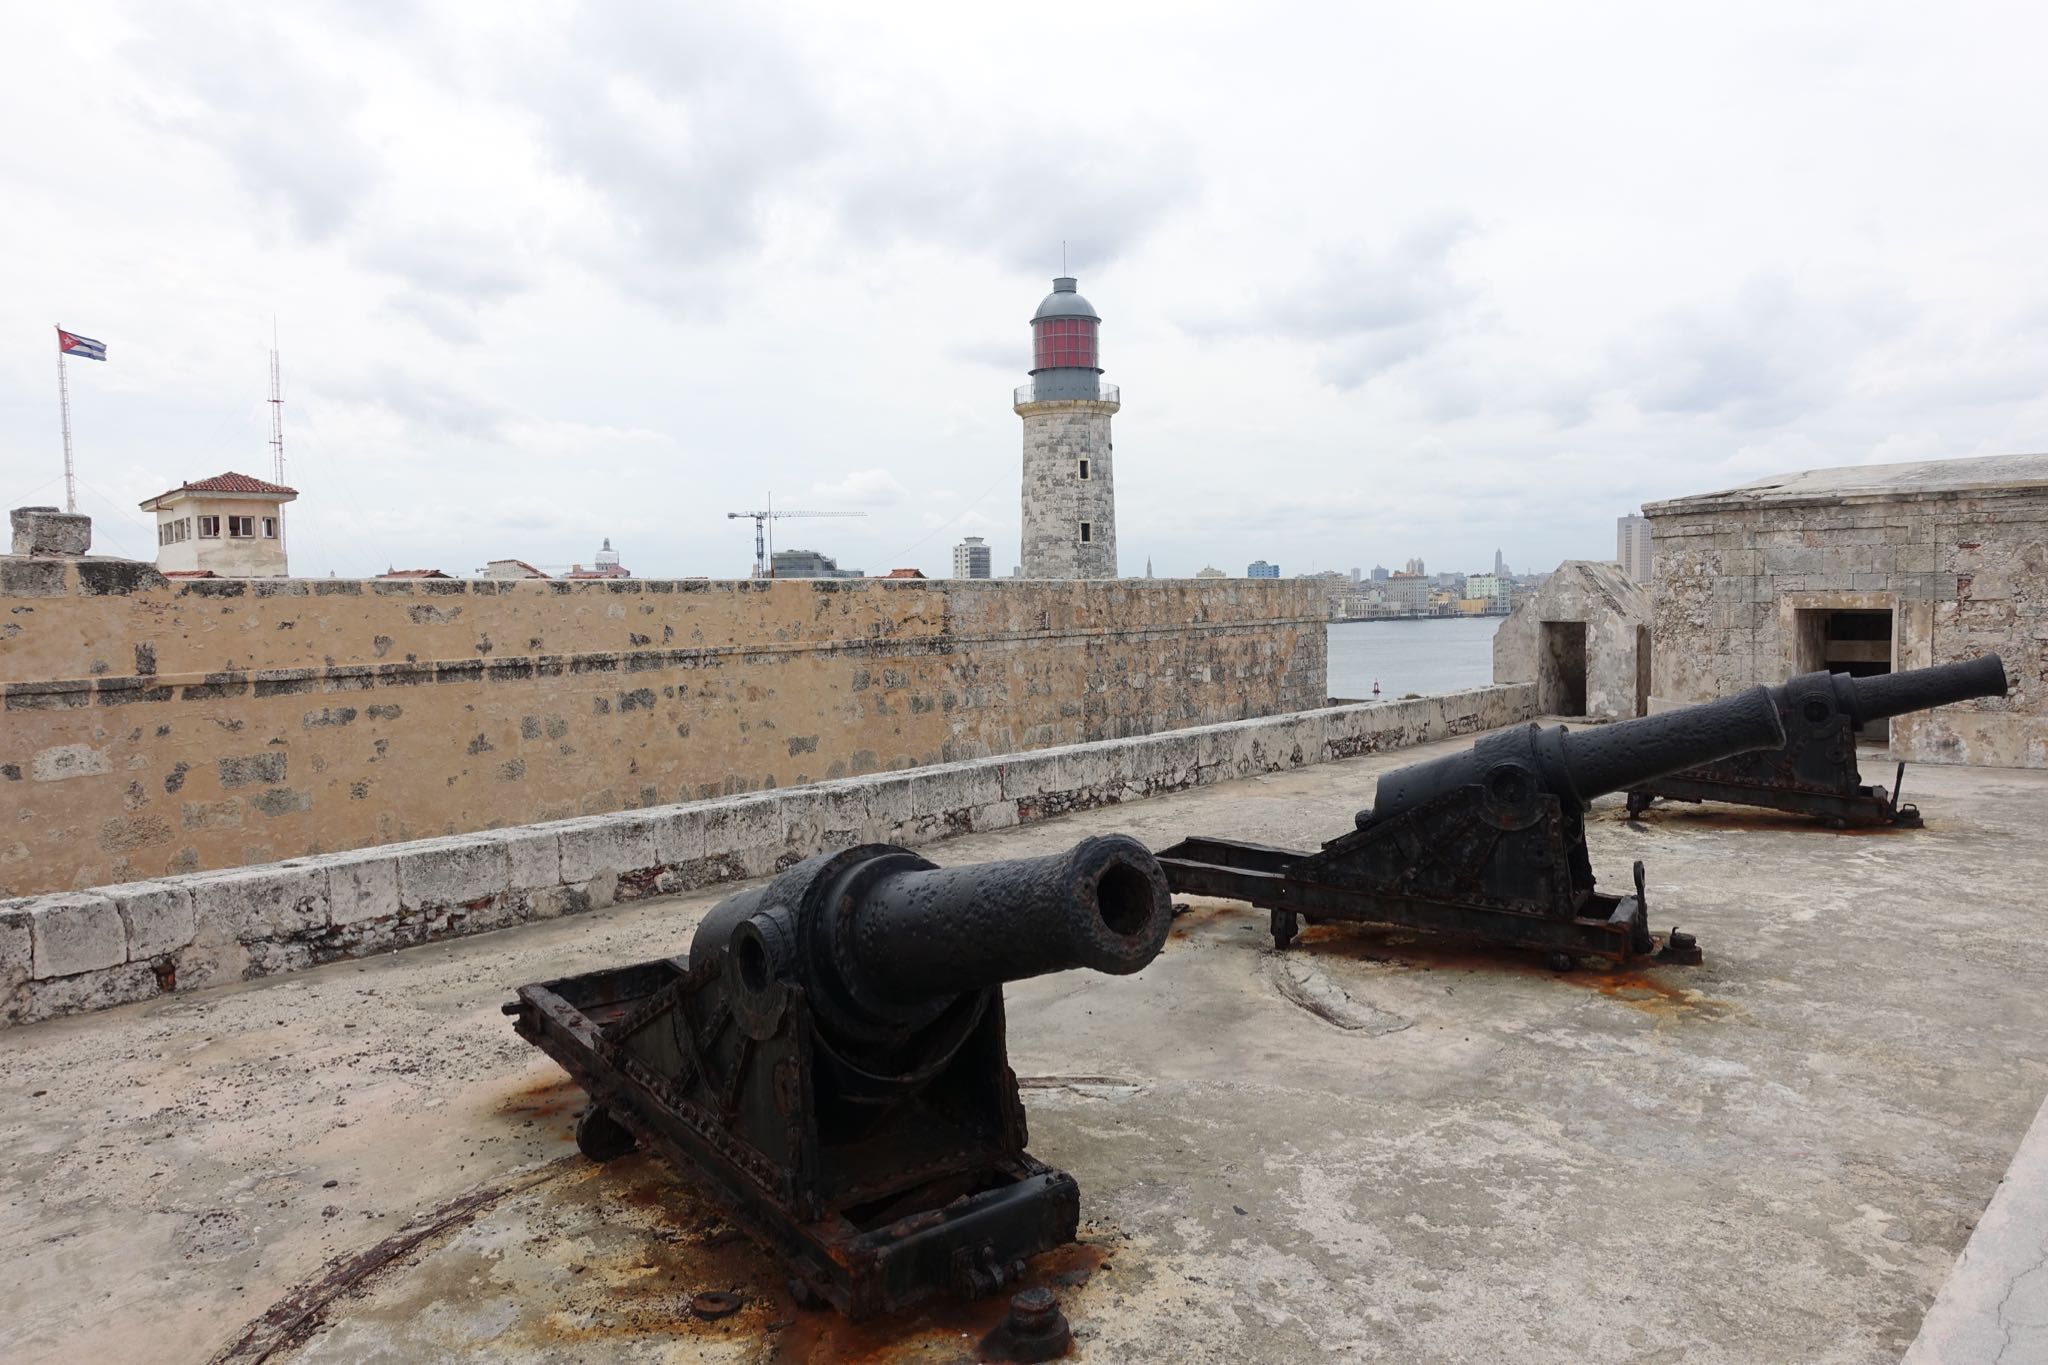 Photo 48 of 221 from the album Highlights Cuba 2019.